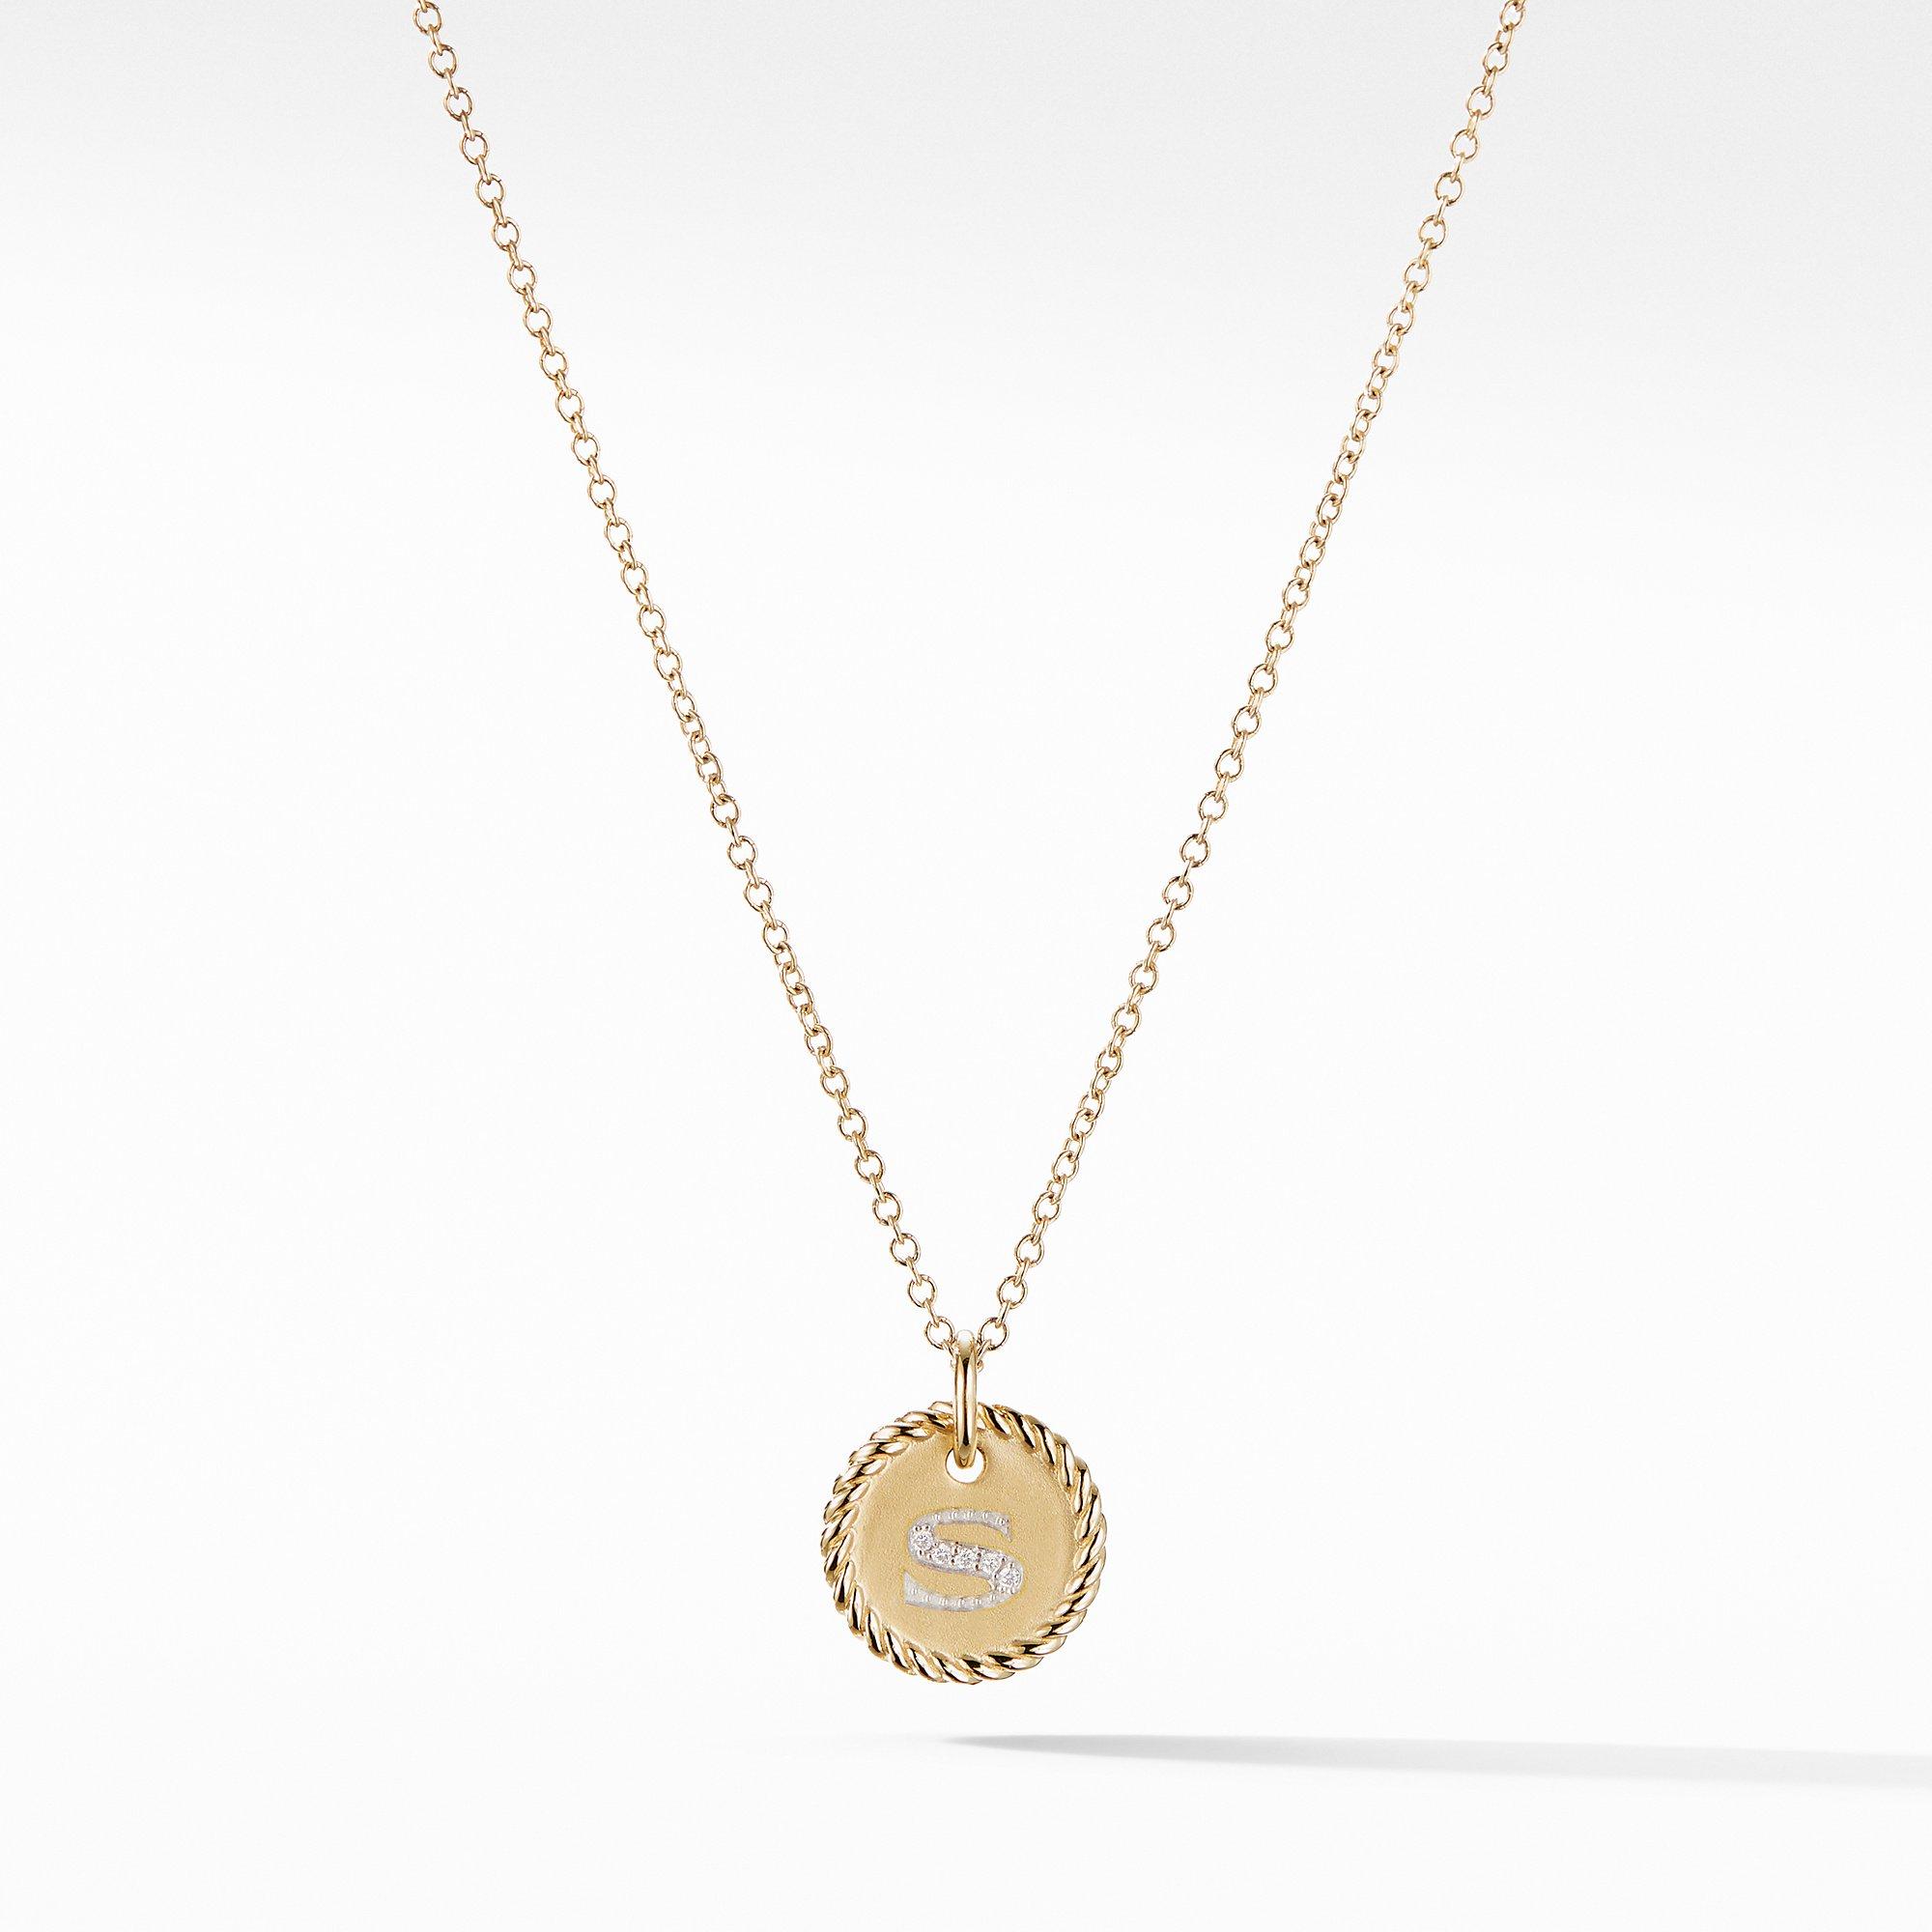 David Yurman S Initial Charm Necklace in 18k Yellow Gold with Diamonds